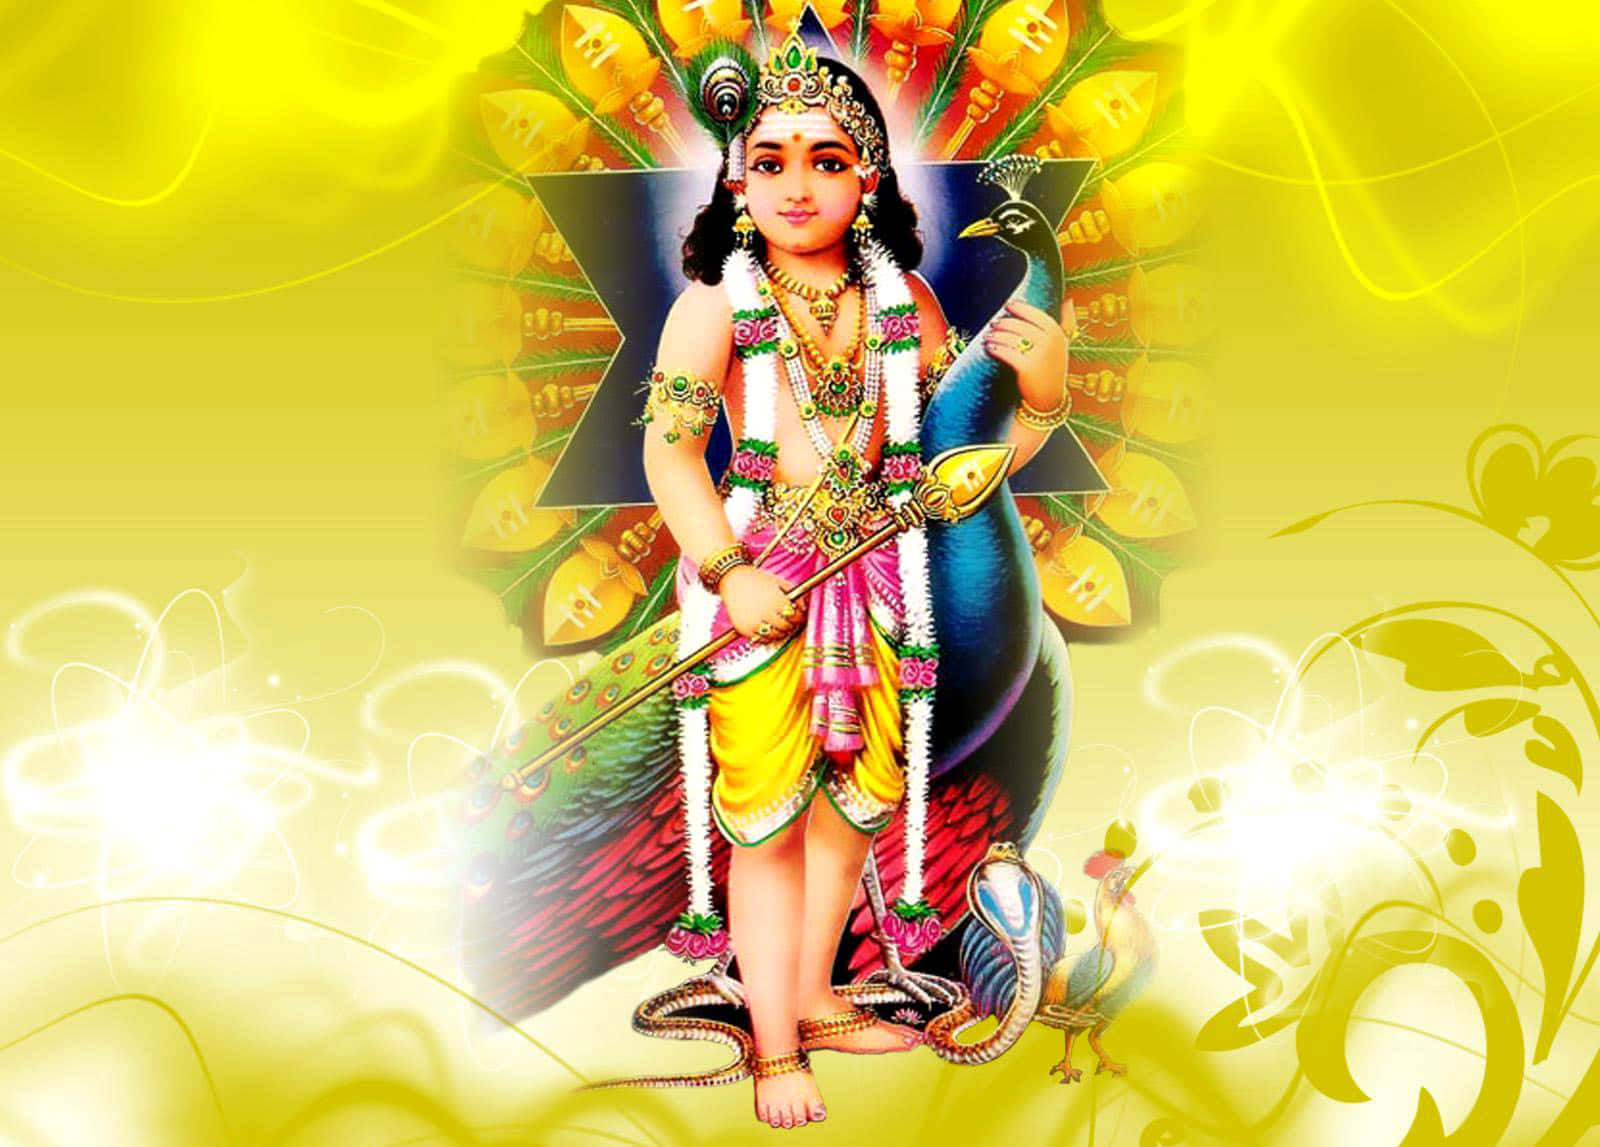 : Lord Murugan standing at the entrance of the temple